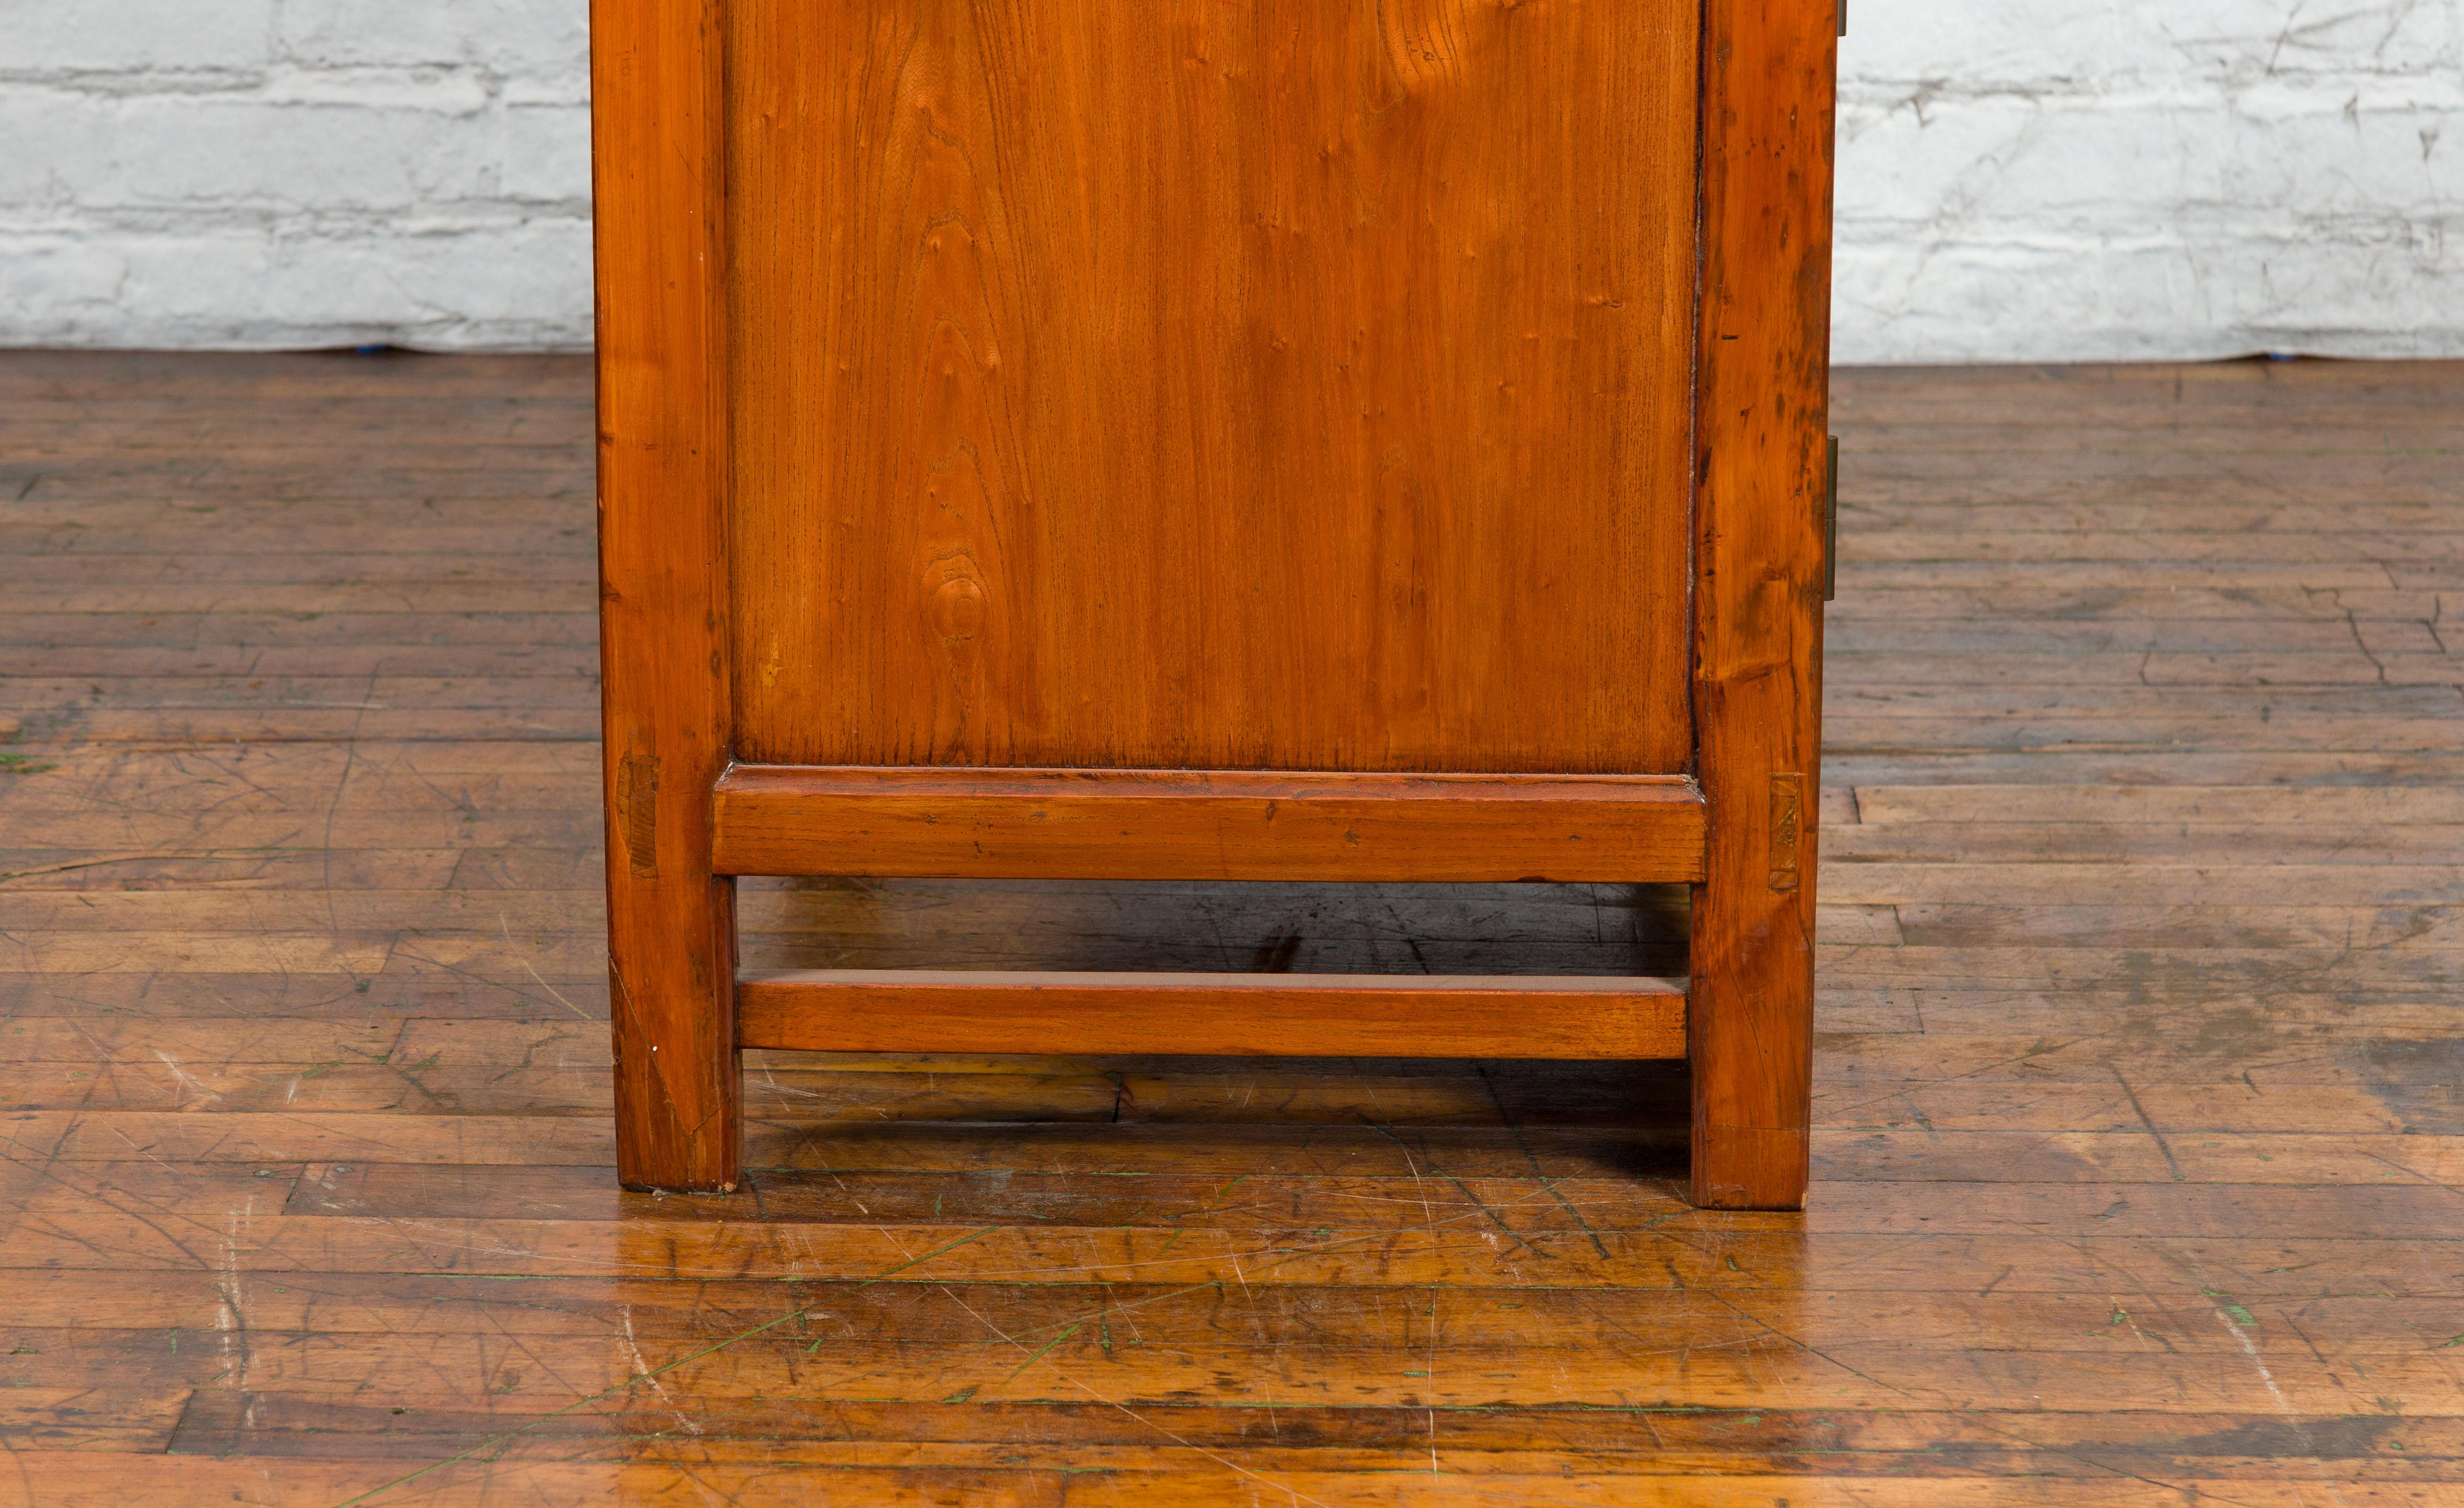 Chinese Qing Dynasty 19th Century Two-Toned Elm Cabinet with Burl Wood Accents For Sale 12